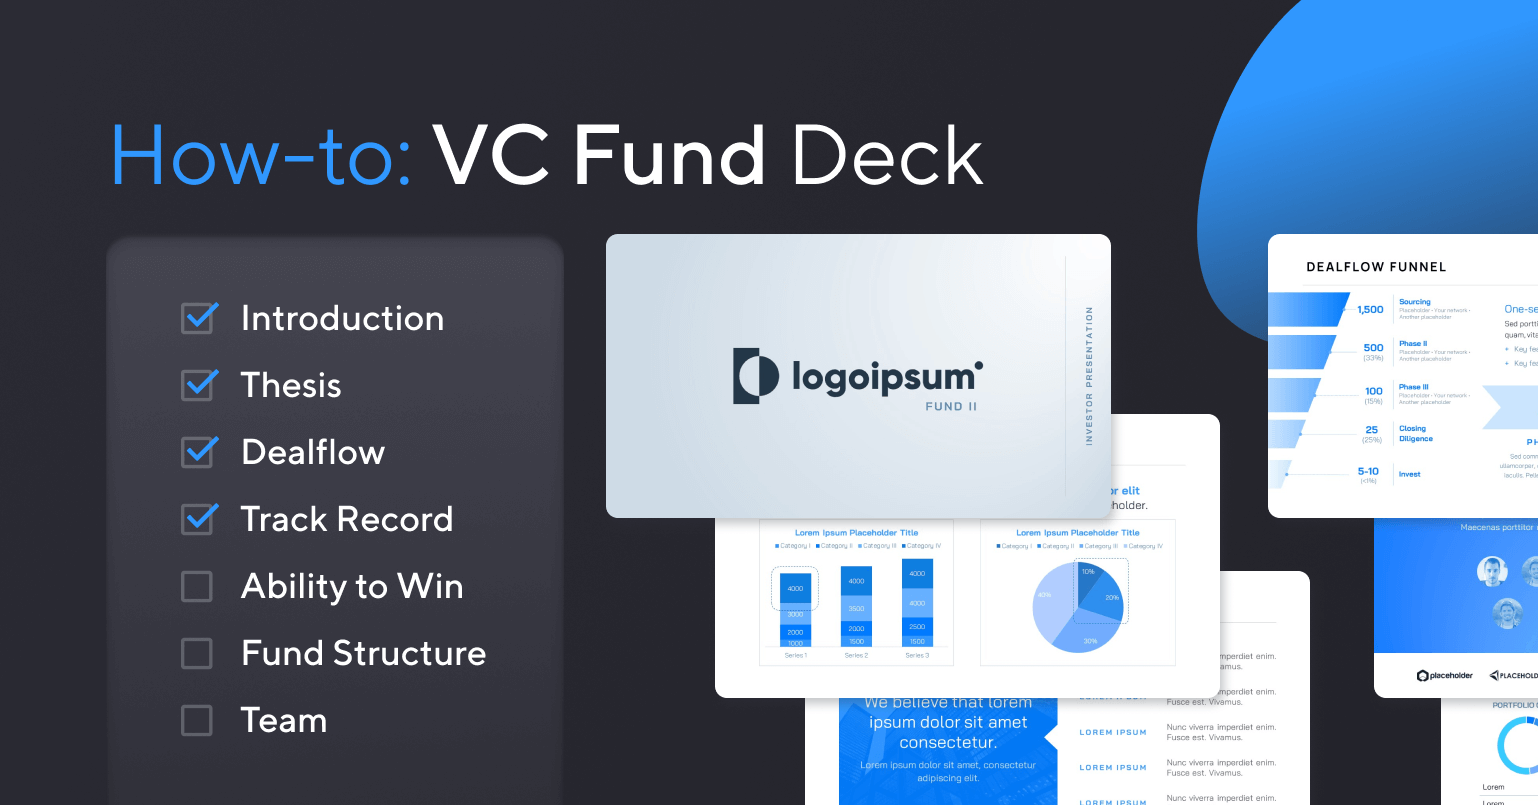 How to create an LP pitch deck for your VC fund